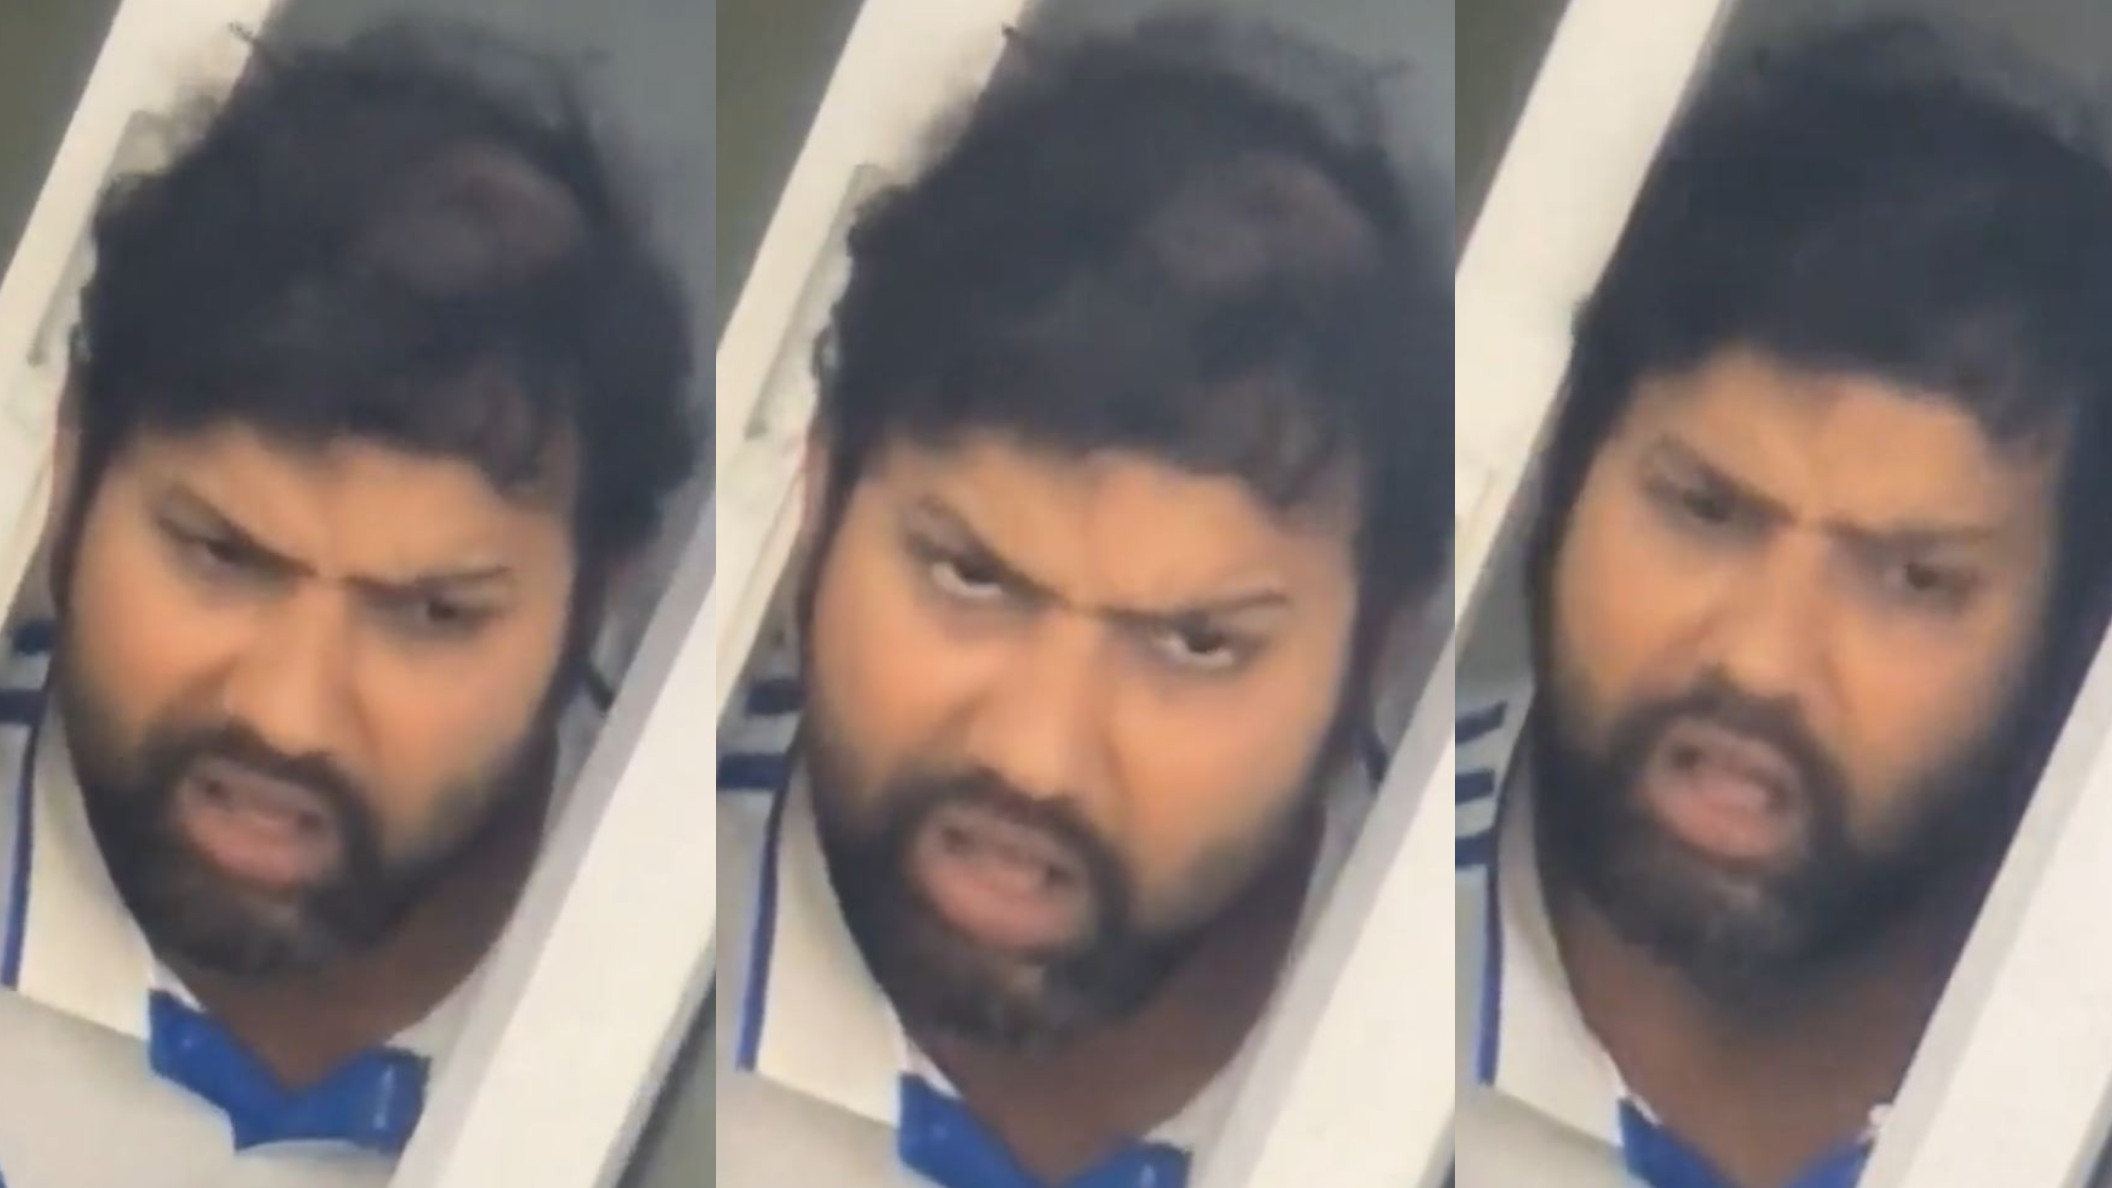 WI v IND 2023: WATCH- Rohit Sharma’s bewildered look out of window during 2nd Test leads to hilarious reactions